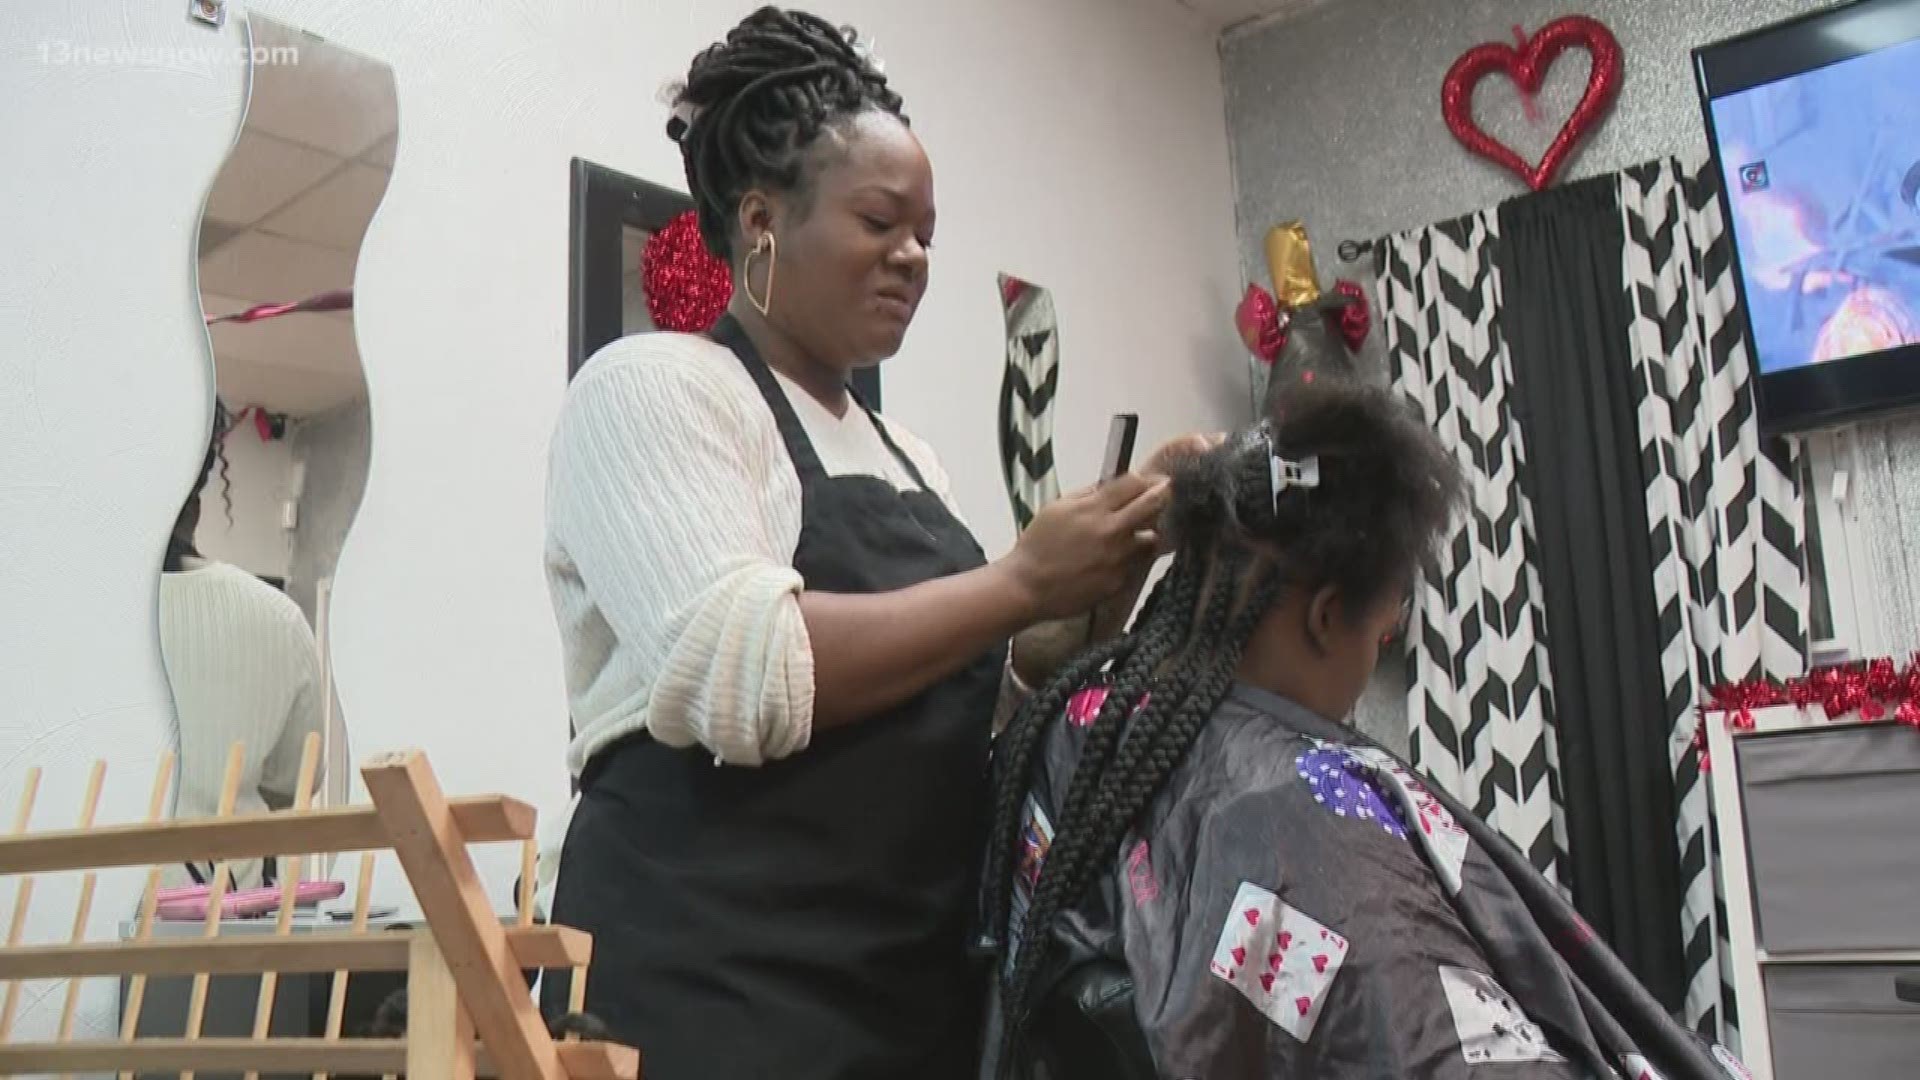 The bill would make it illegal to discriminate against anyone based on hair texture, hair type and protective hairstyles like braids, locks and twists.